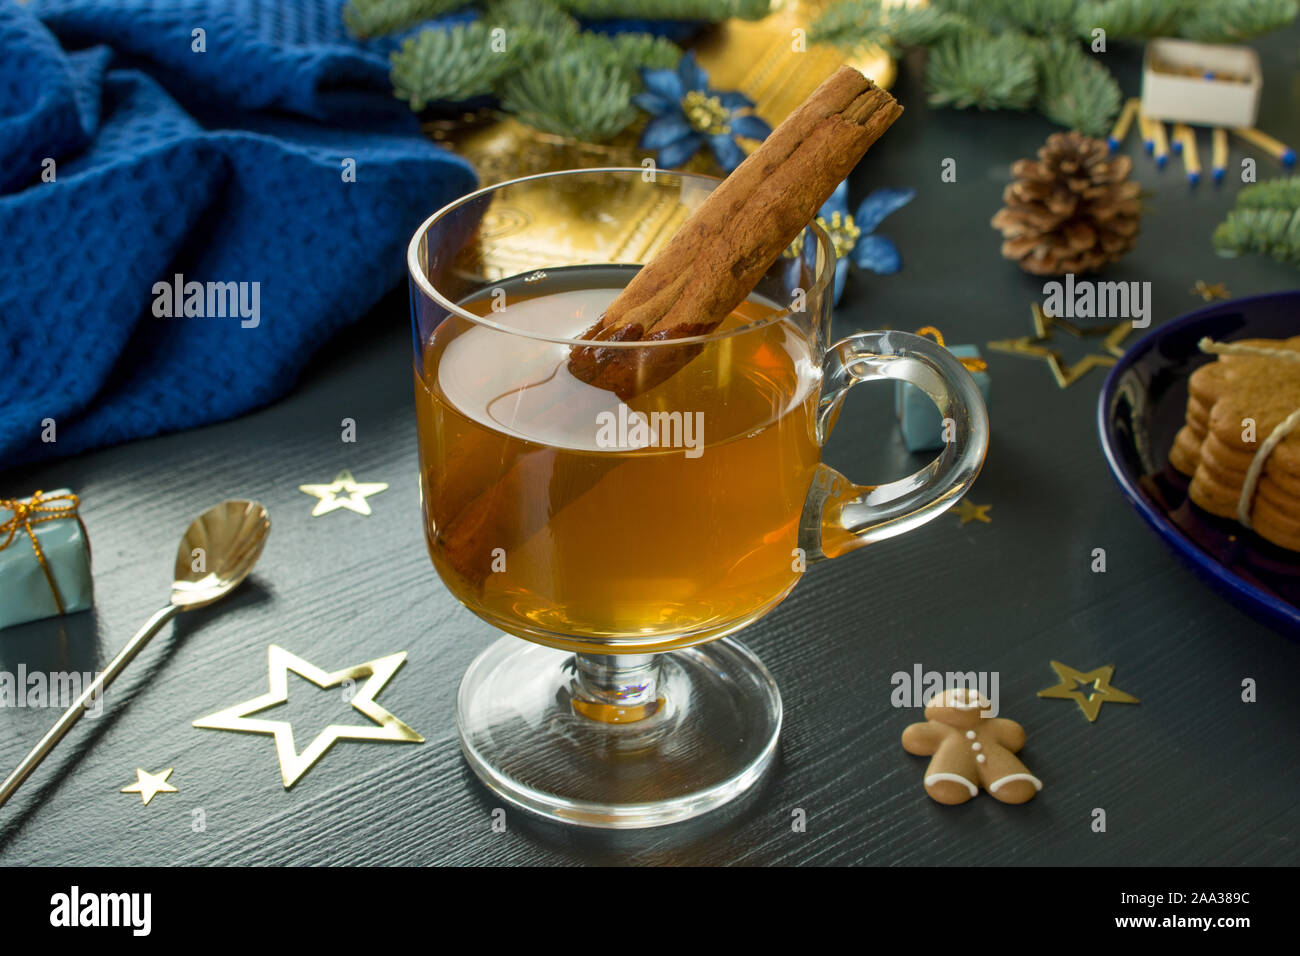 Food photography  and flat lay of a festive Christmas table decorated in blue and gold Stock Photo